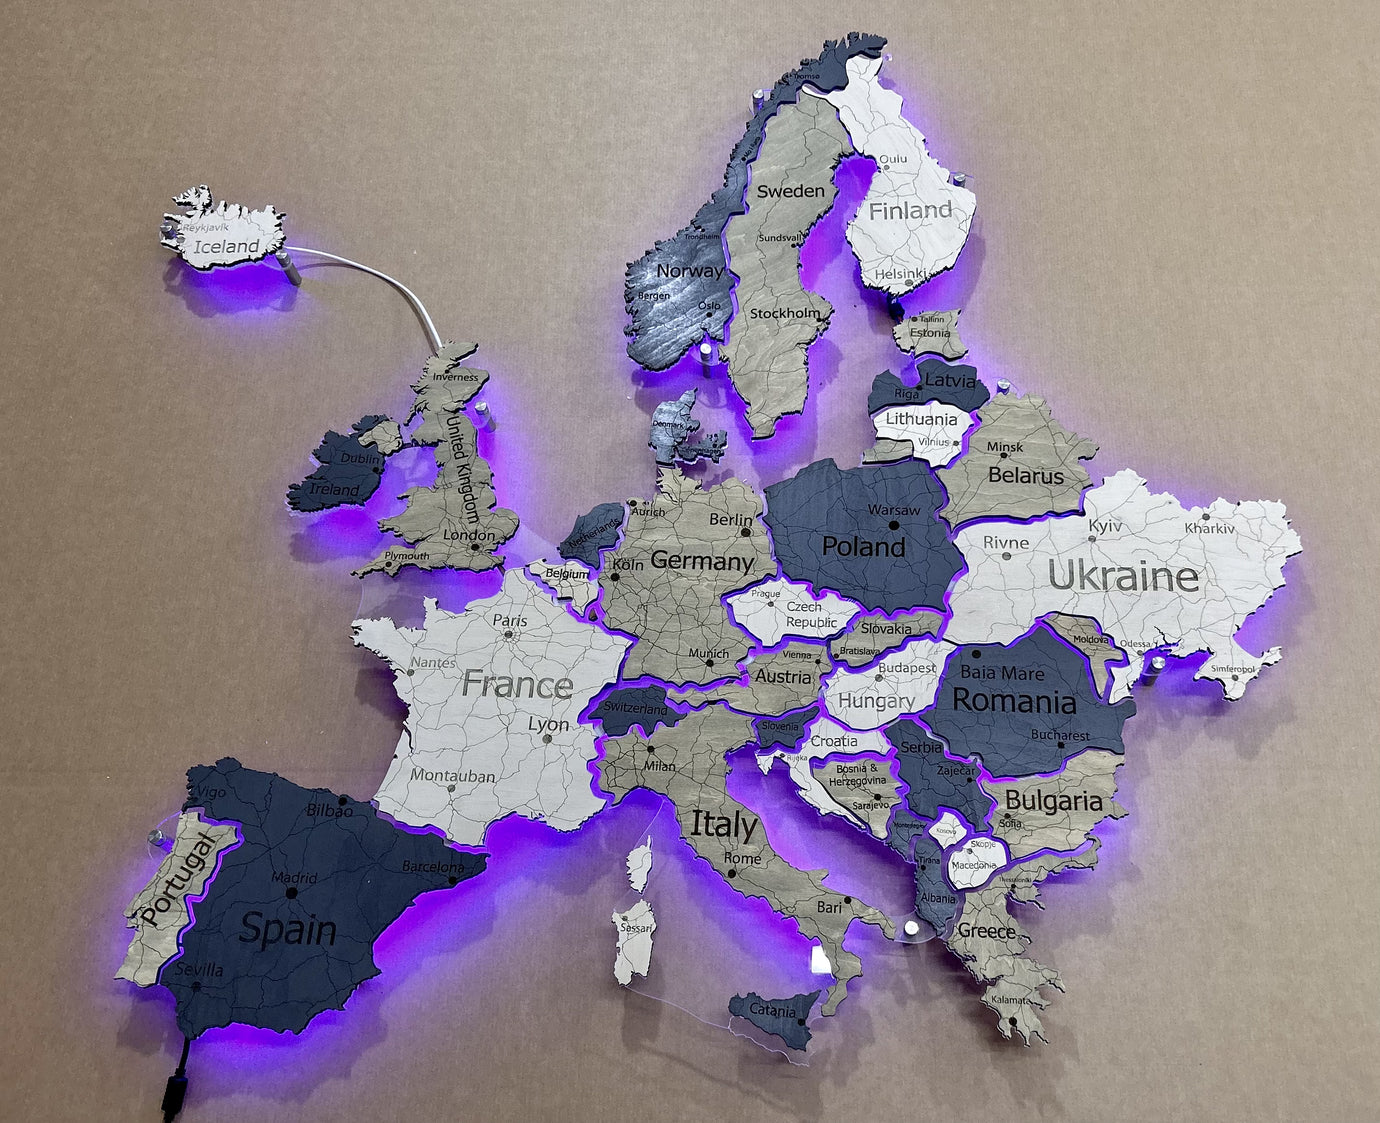 Europe LED RGB map on acrylic glass with backlighting between countries color Deep